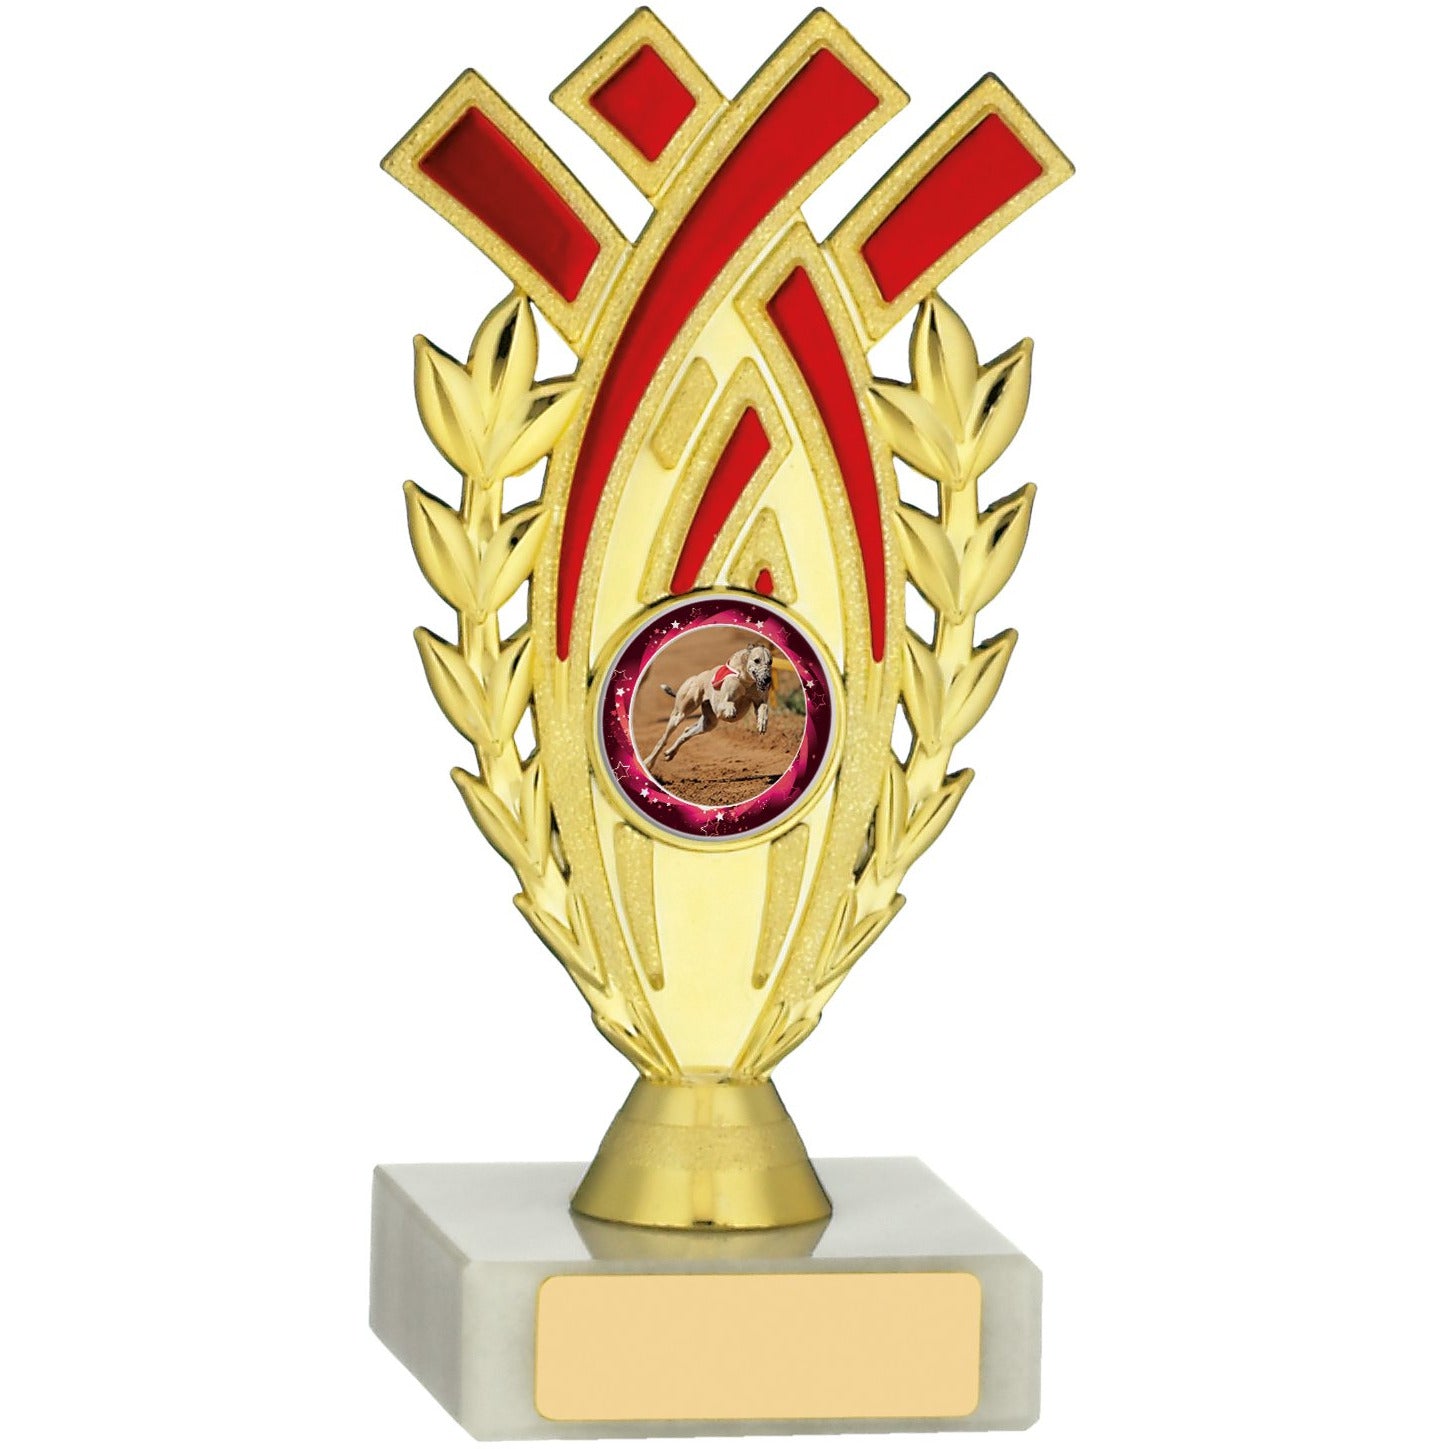 Gold And Red Wreath Recognition Award on Marble Base